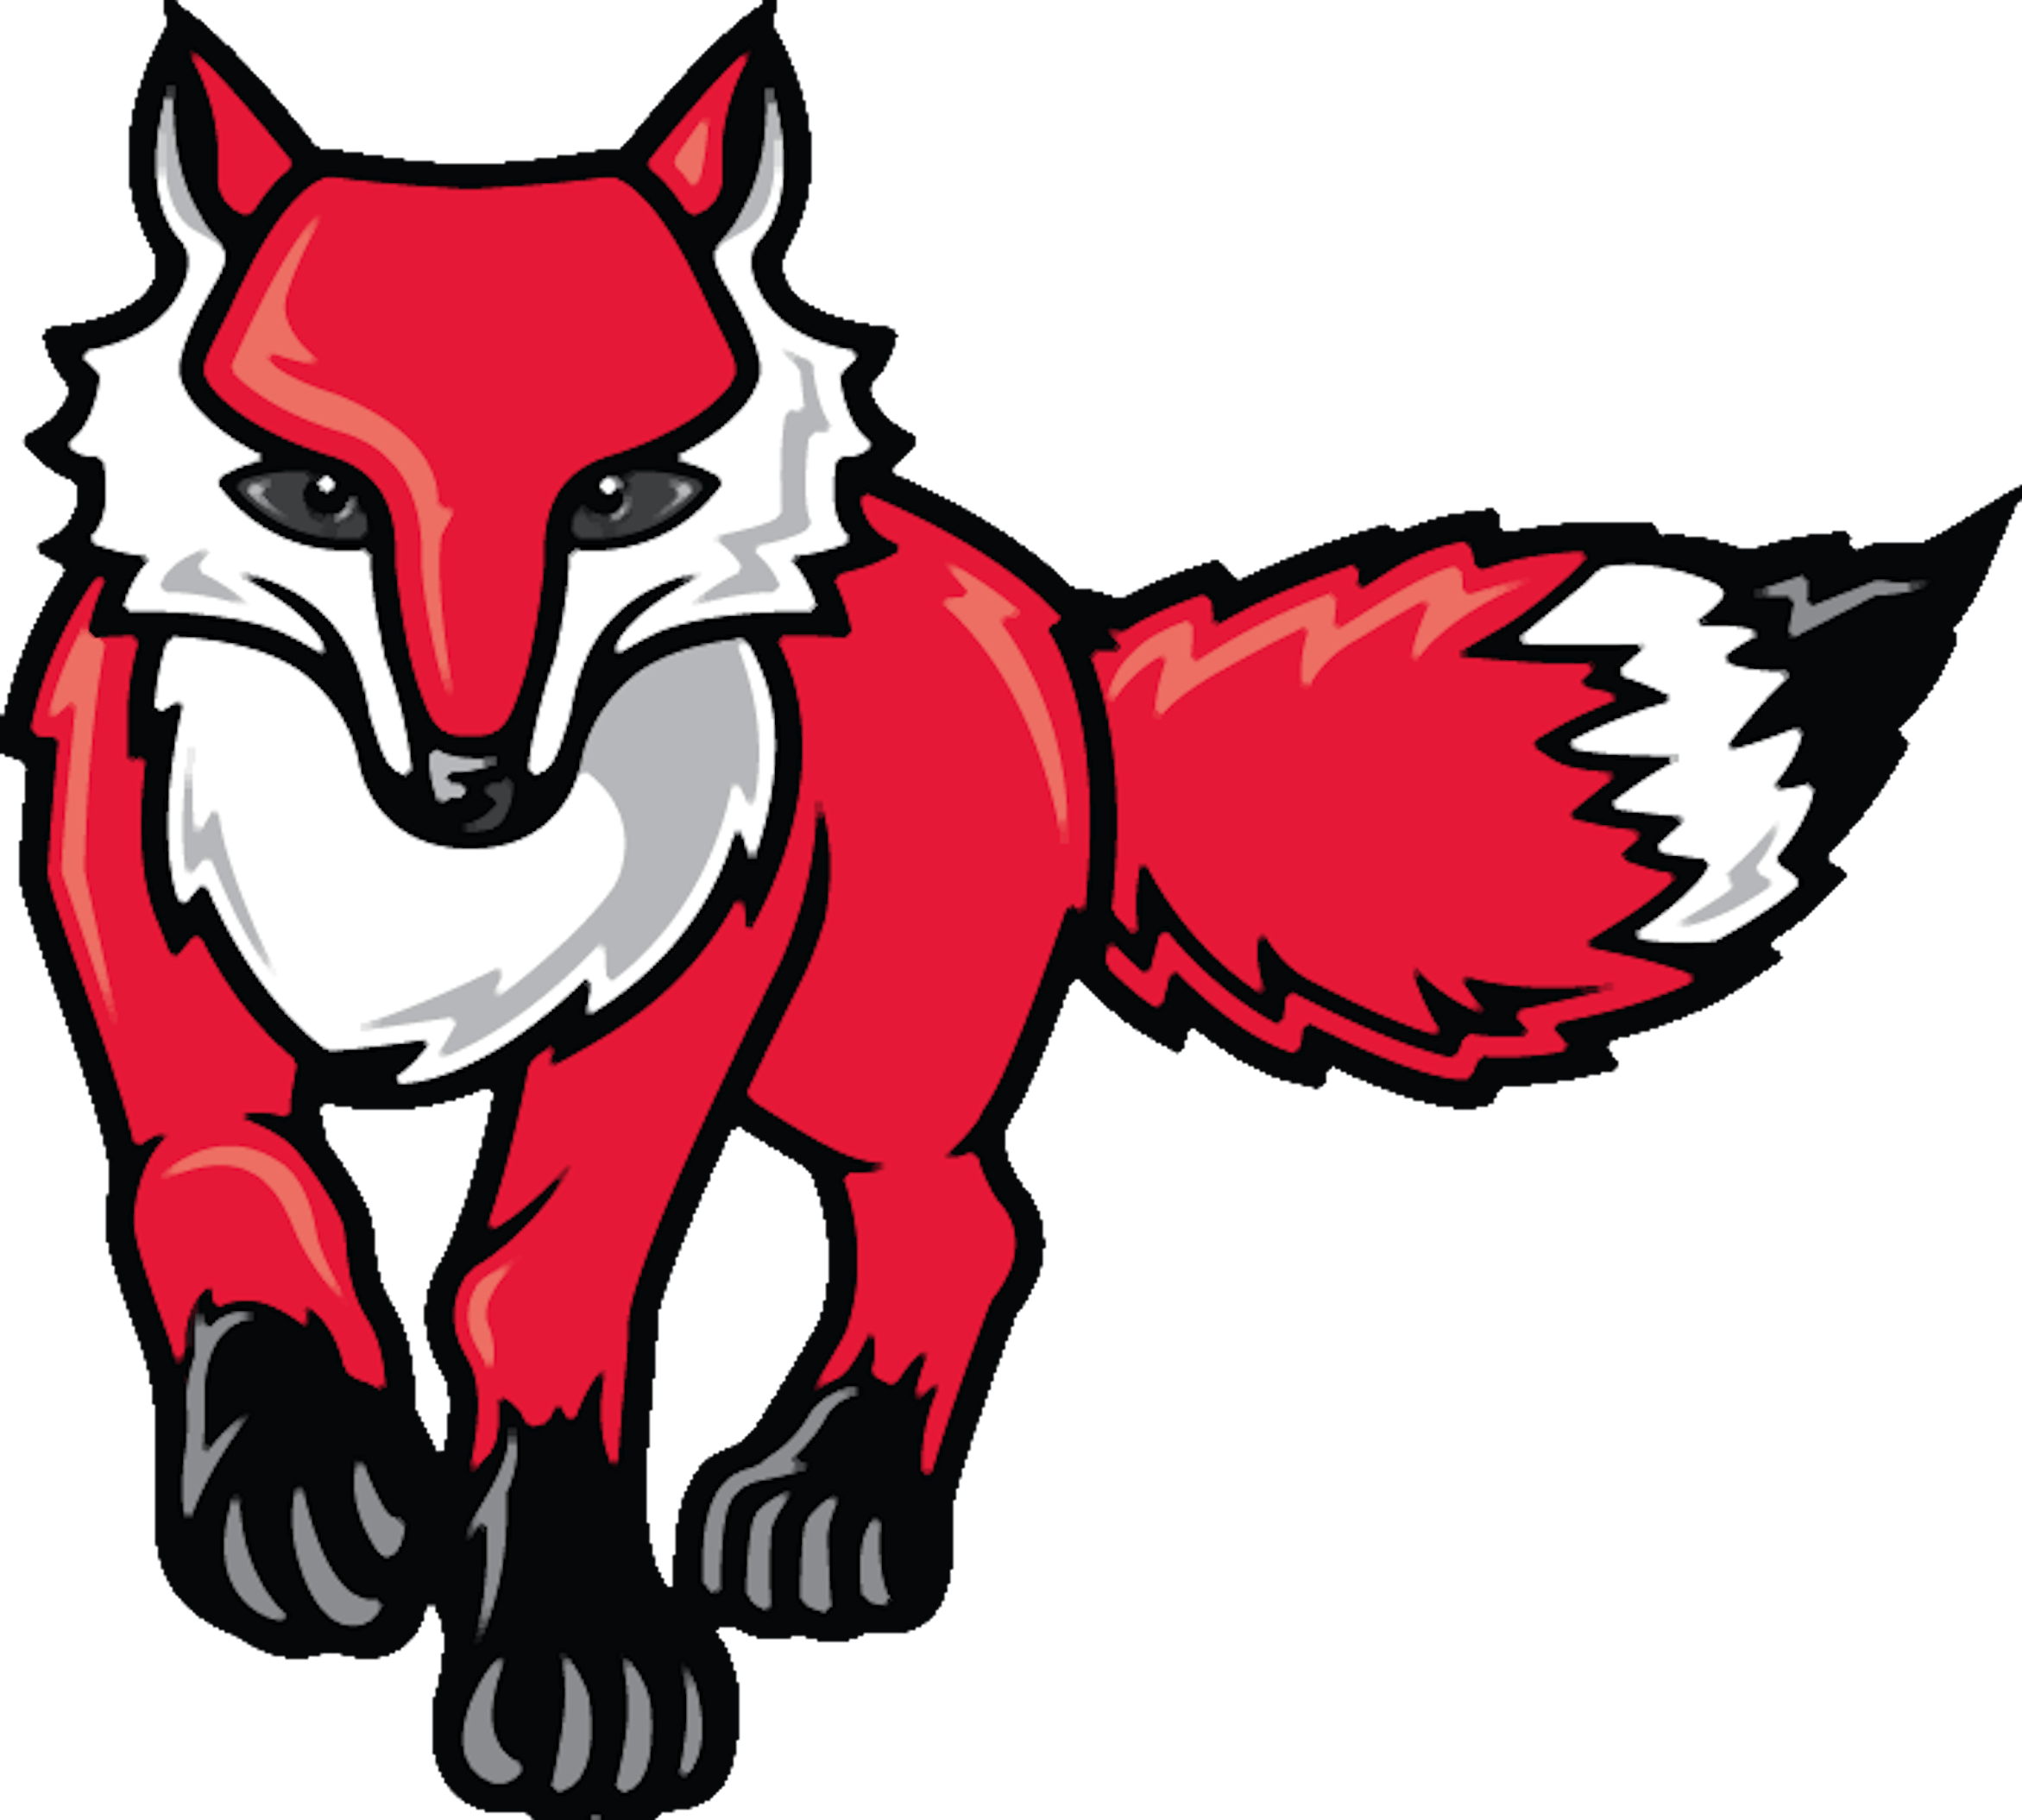 Red Fox Head Logo - Red Fox | Free Images at Clker.com - vector clip art online, royalty ...